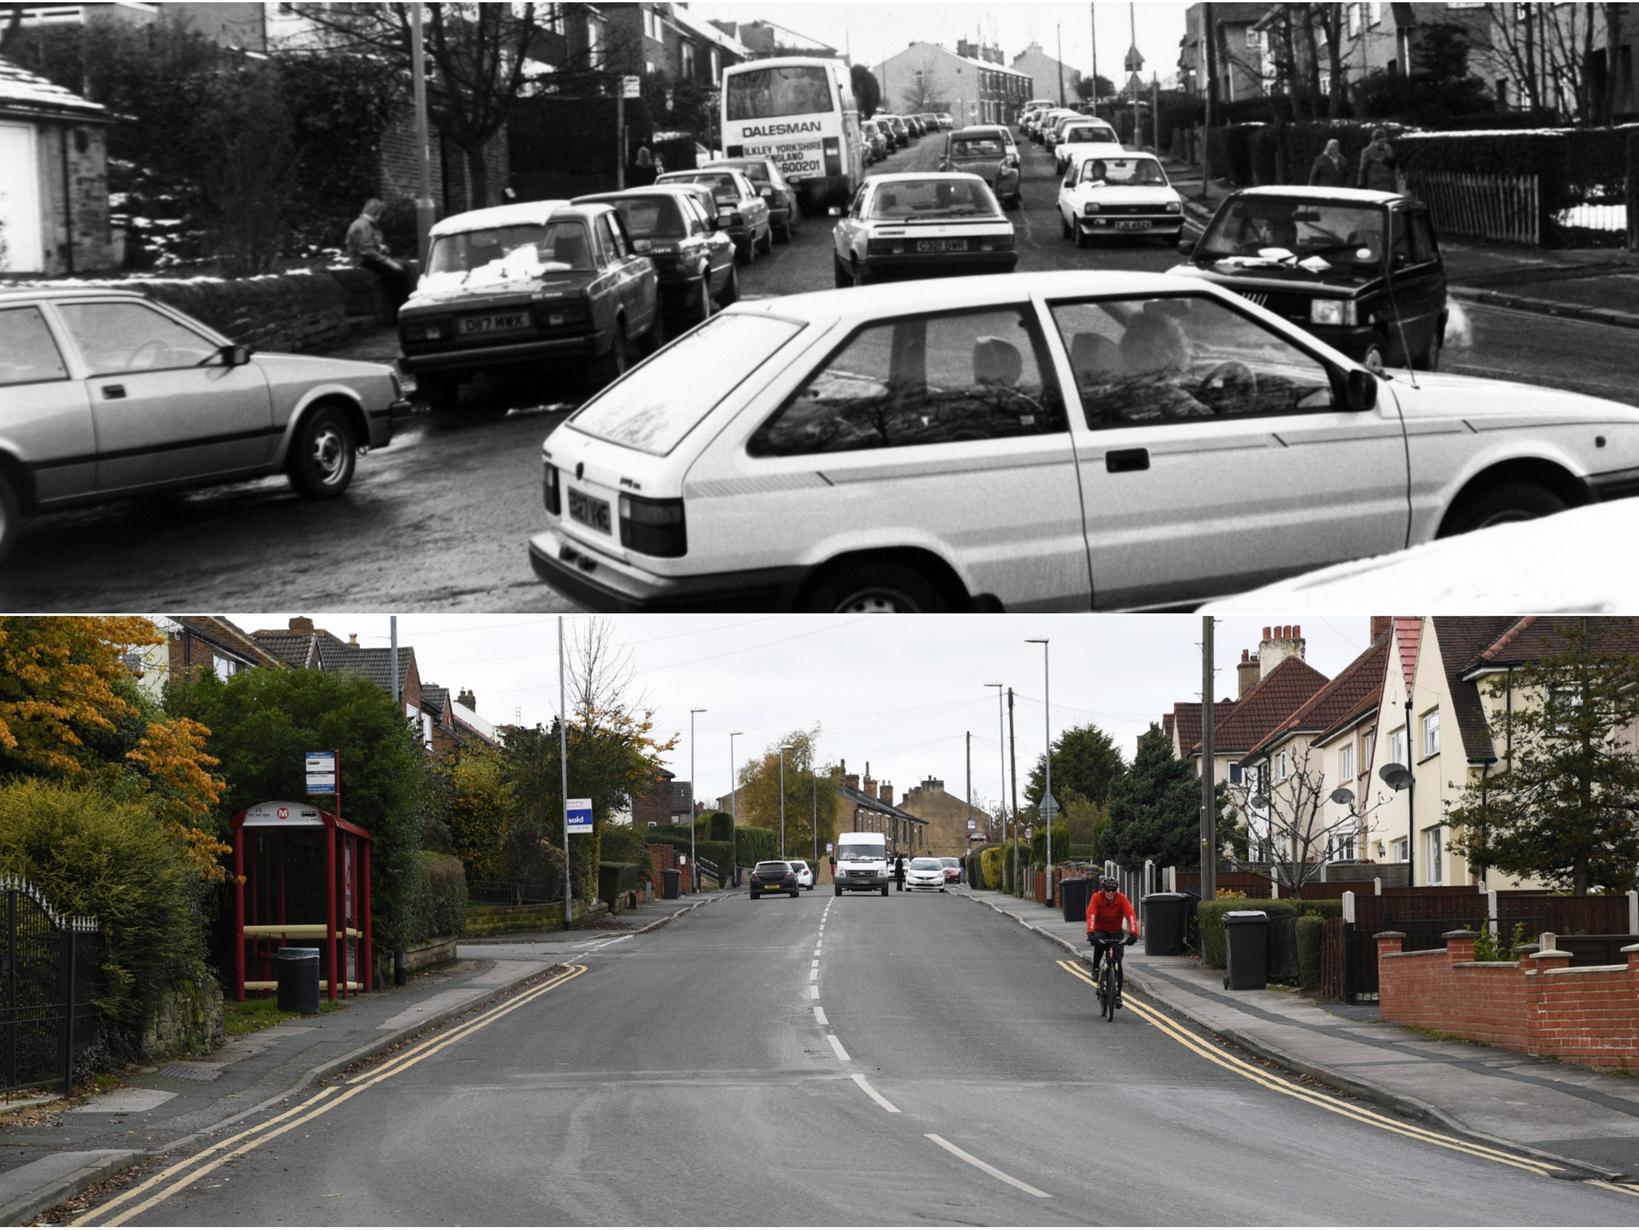 Fartown at its junction with Fulneck in 1988, as traffic builds up and vehicles park waiting to pick up pupils from Fulneck School. A very different view in 2019.